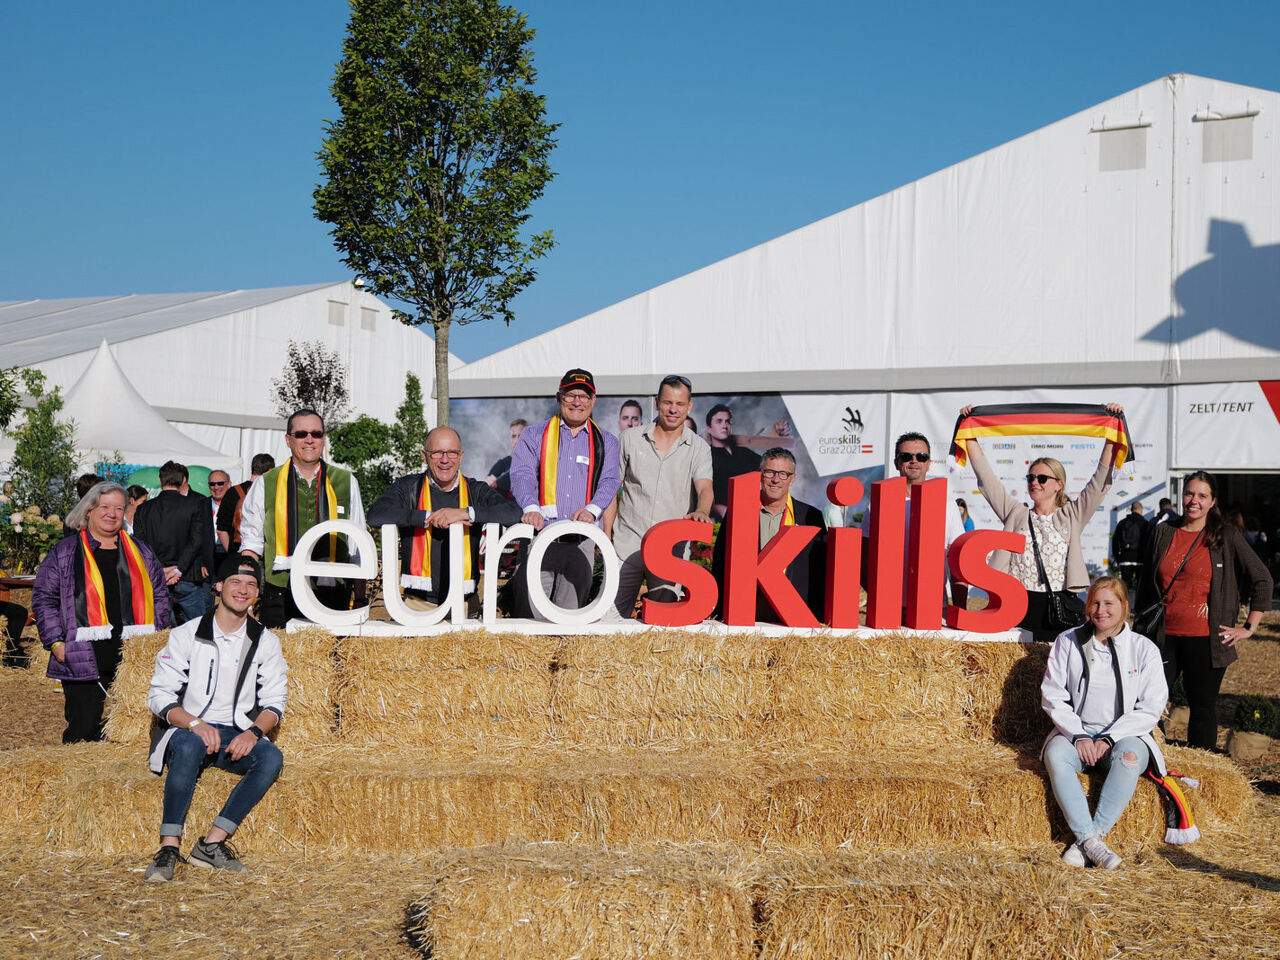 Host cities for EuroSkills 2023 and 2027 announced